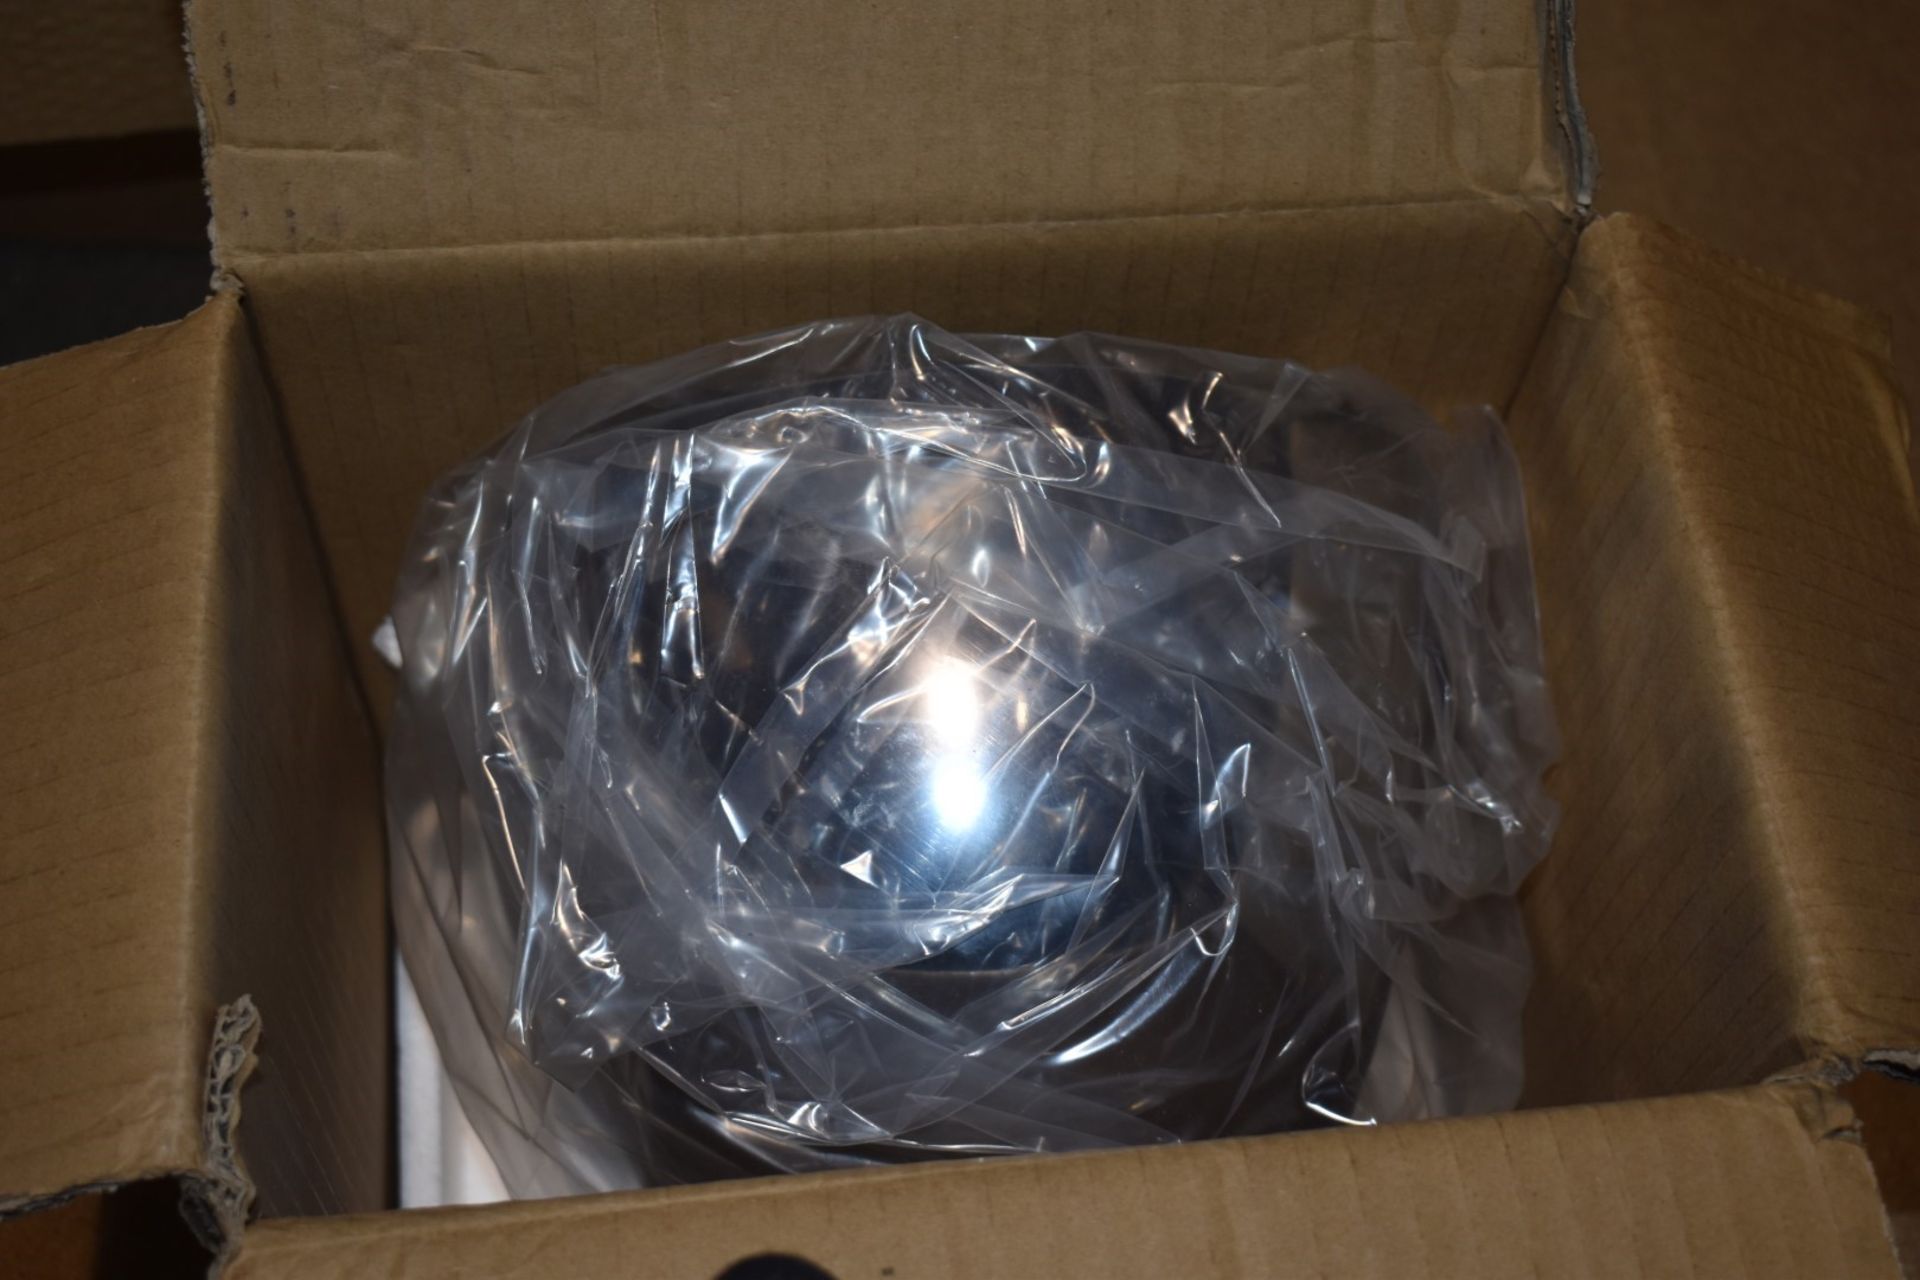 1 x Air Force Electric Hand Dryer in Chrome Model Number J48970W New and Boxed - Image 3 of 4